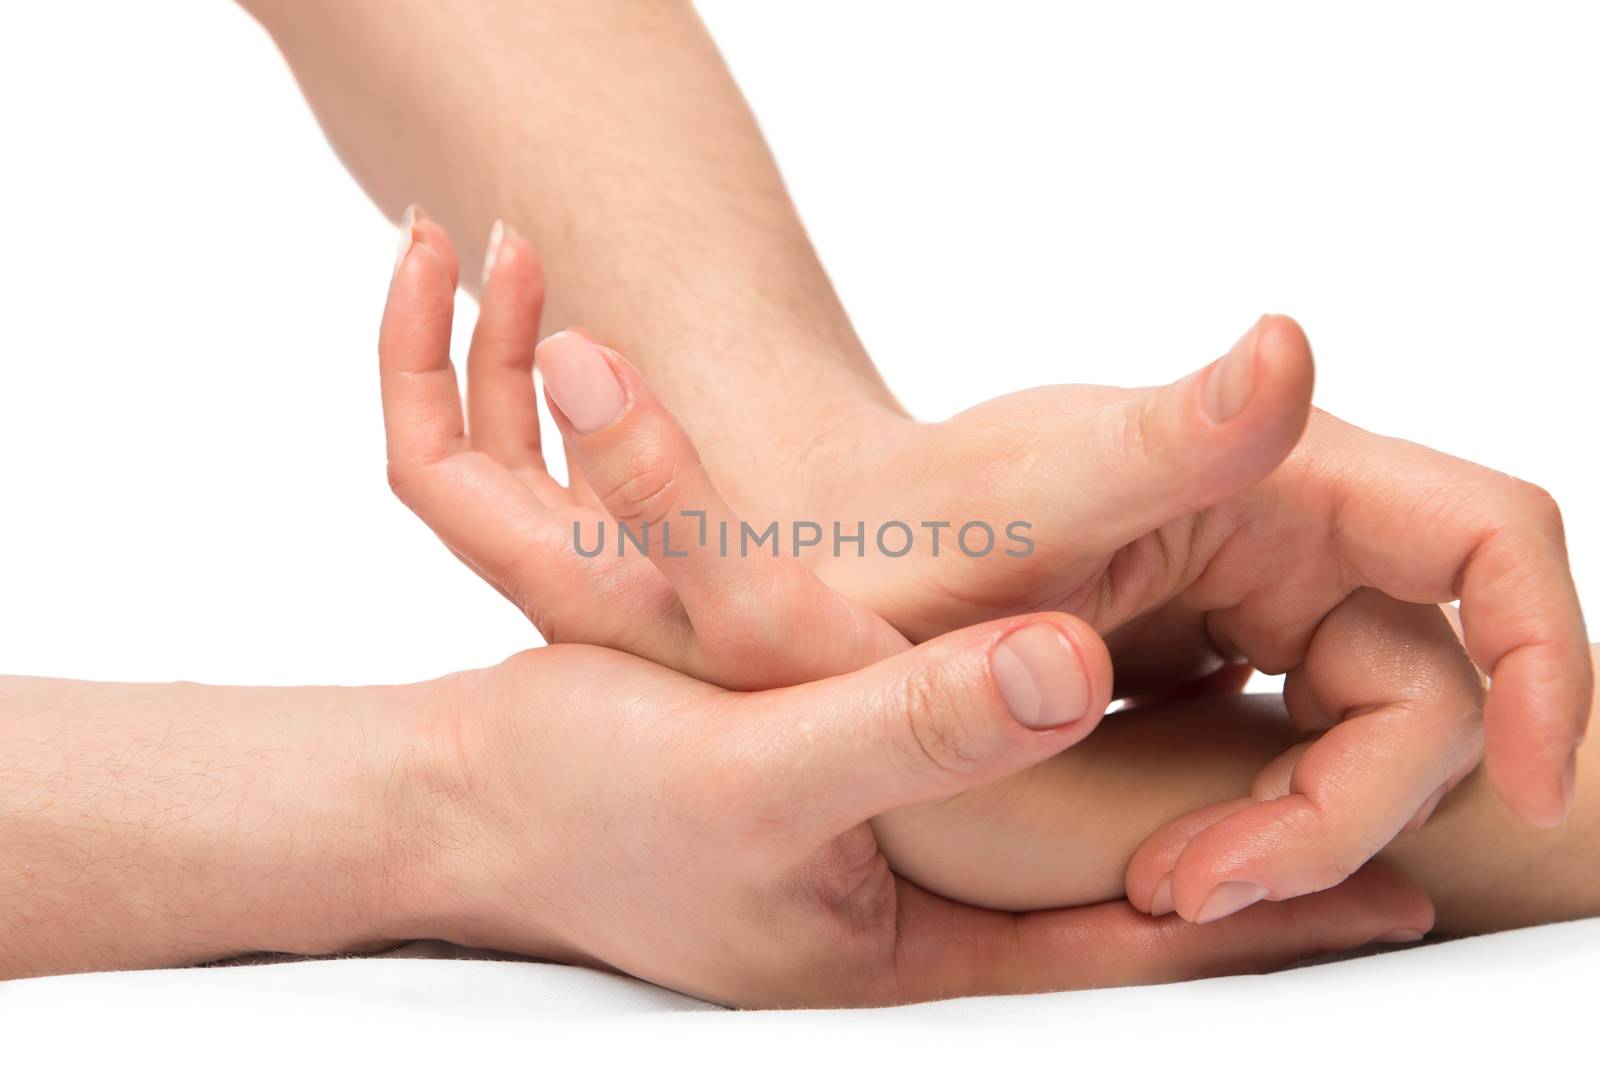 kneading massage hands, close-up shot on a white background by kosmsos111